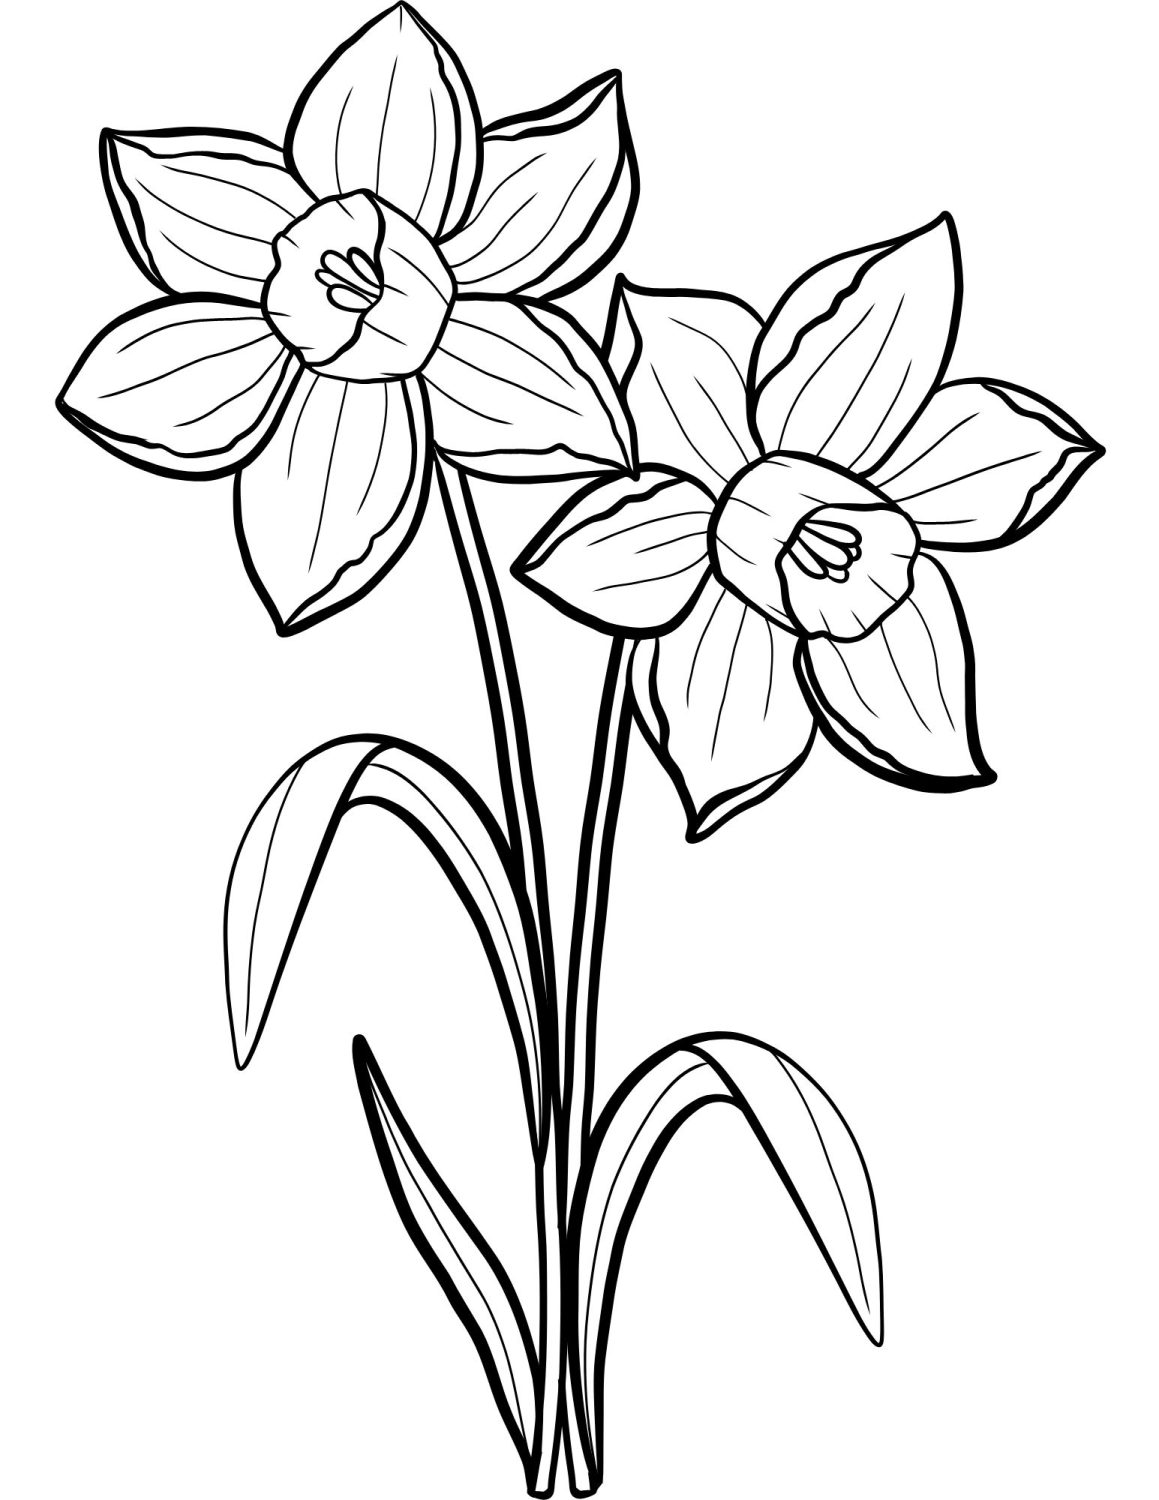 daffodils to color for adults